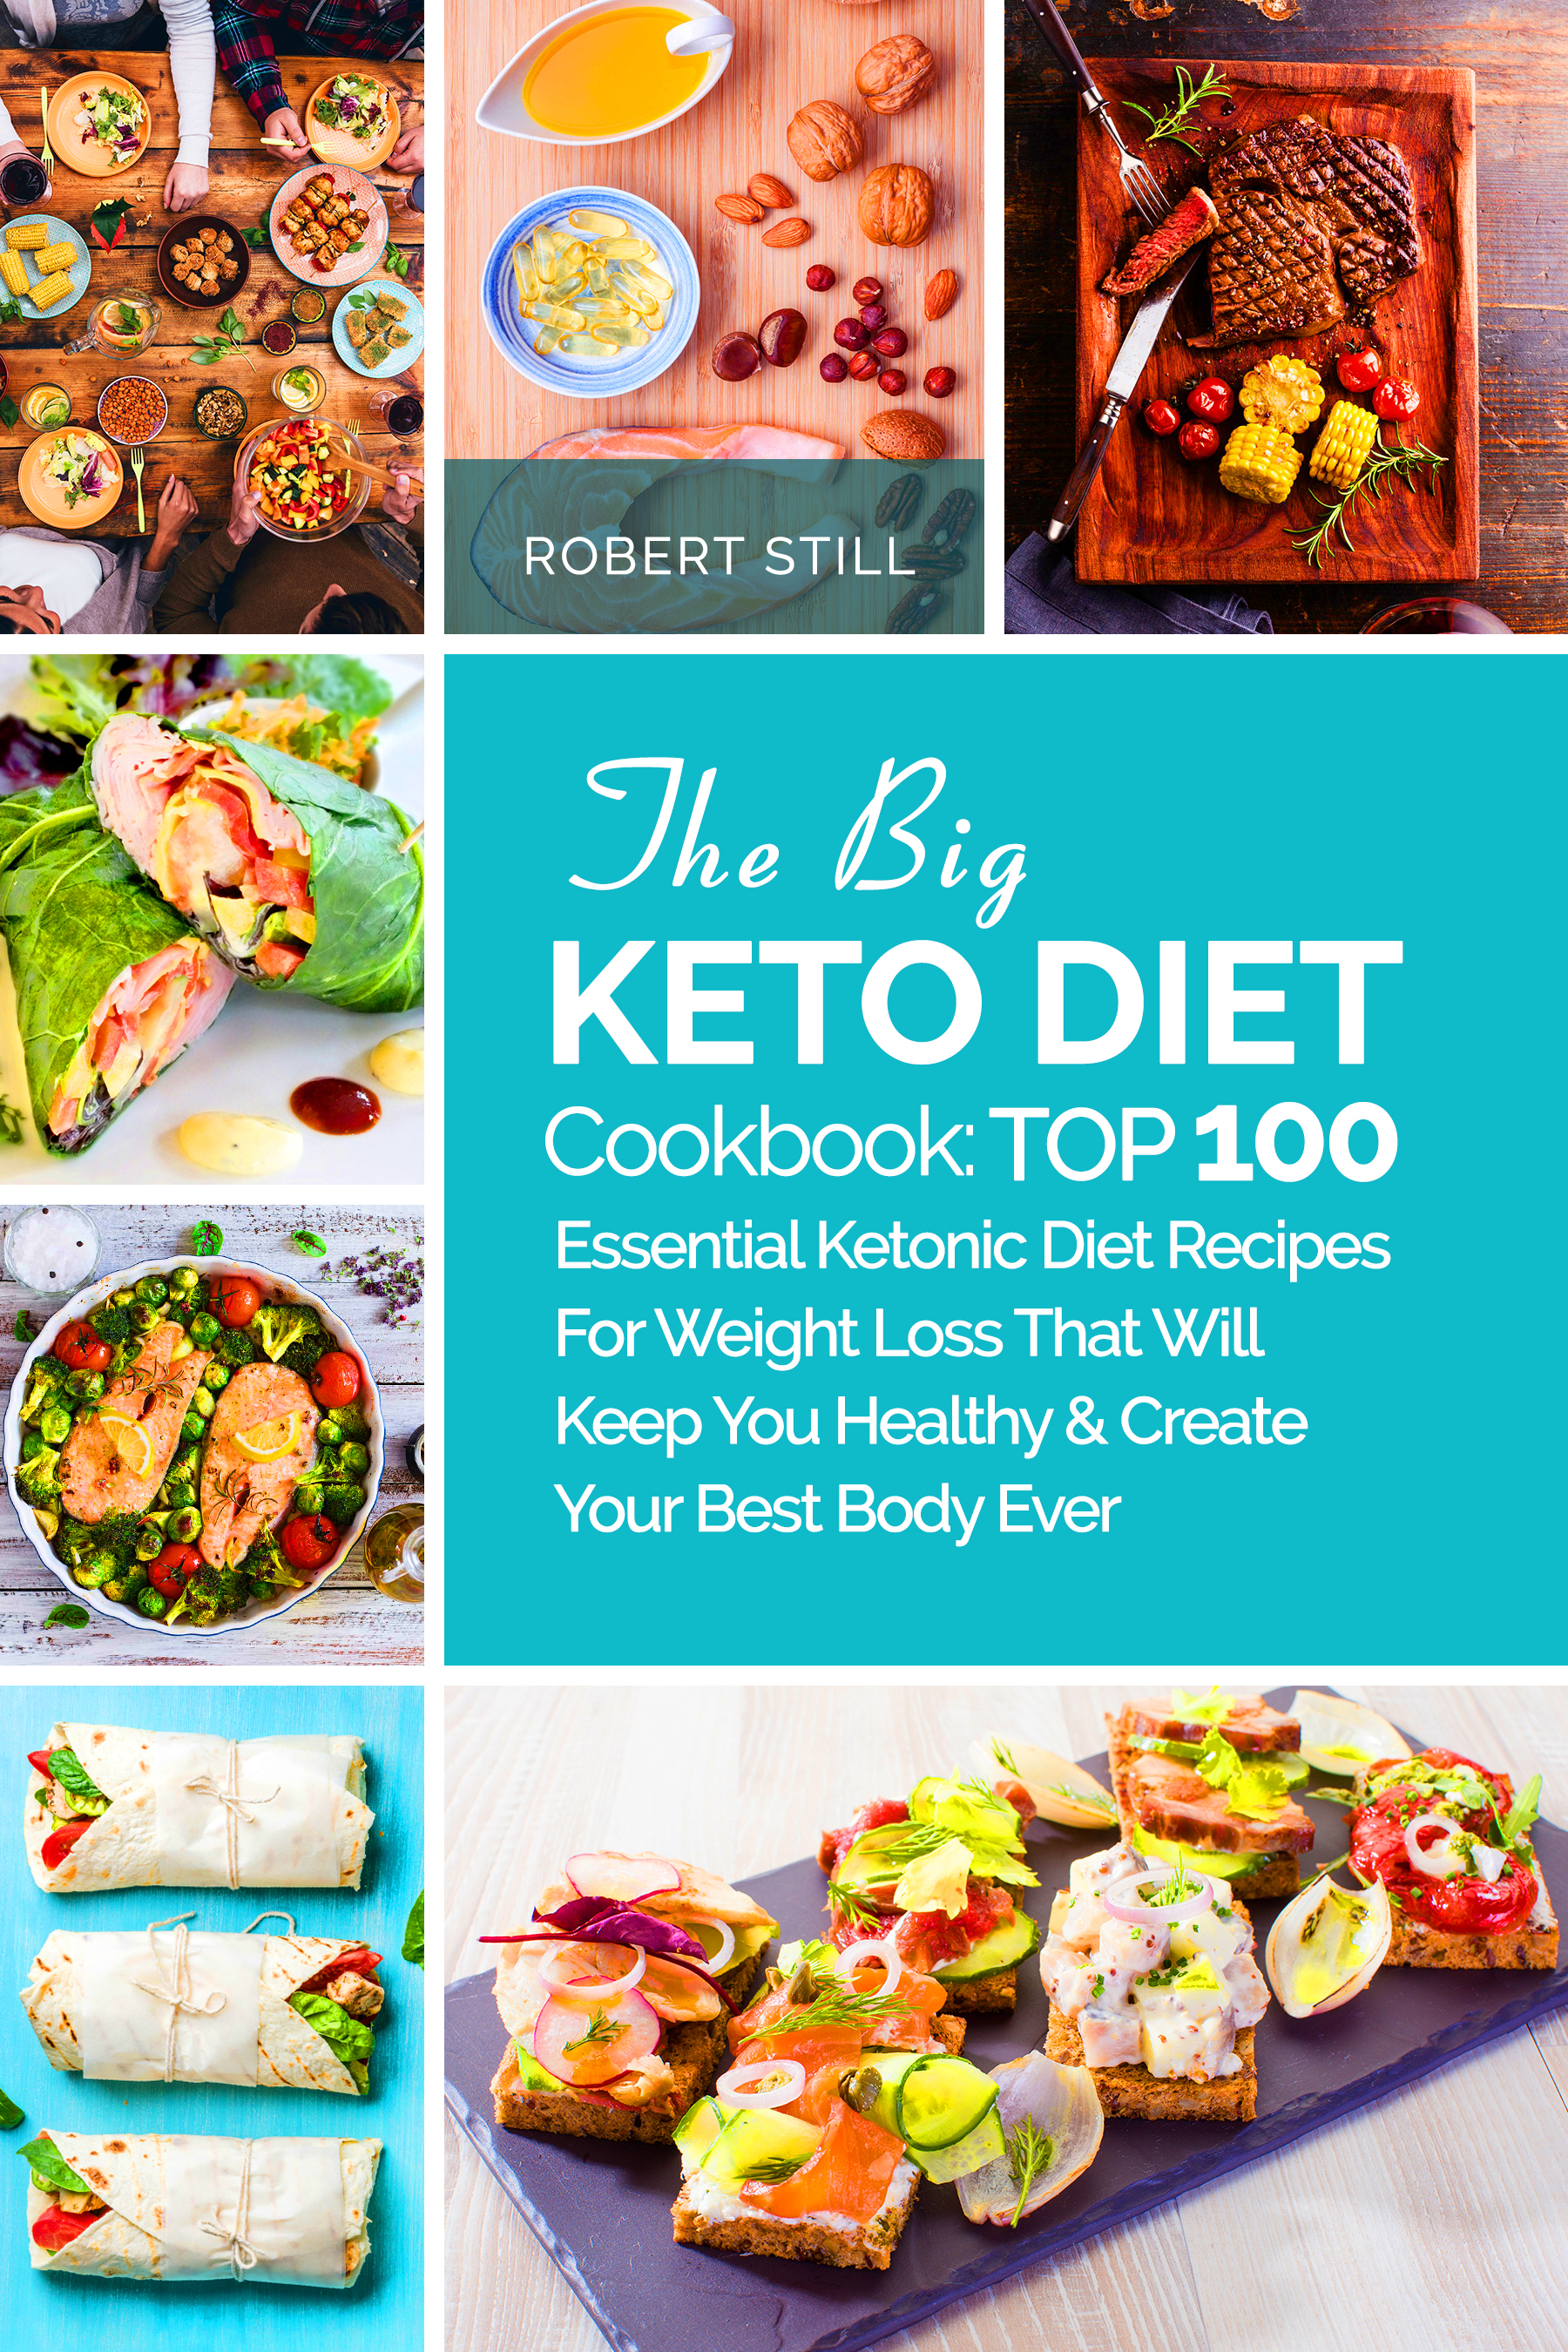 FREE: The Big Keto Diet Cookbook: TOP 100 Essential Ketonic Diet Recipes For Weight Loss That Will Keep You Healthy and Create Your Best Body Ever: ketosis weight loss keto diet low carb diet whats keto by Robert Still